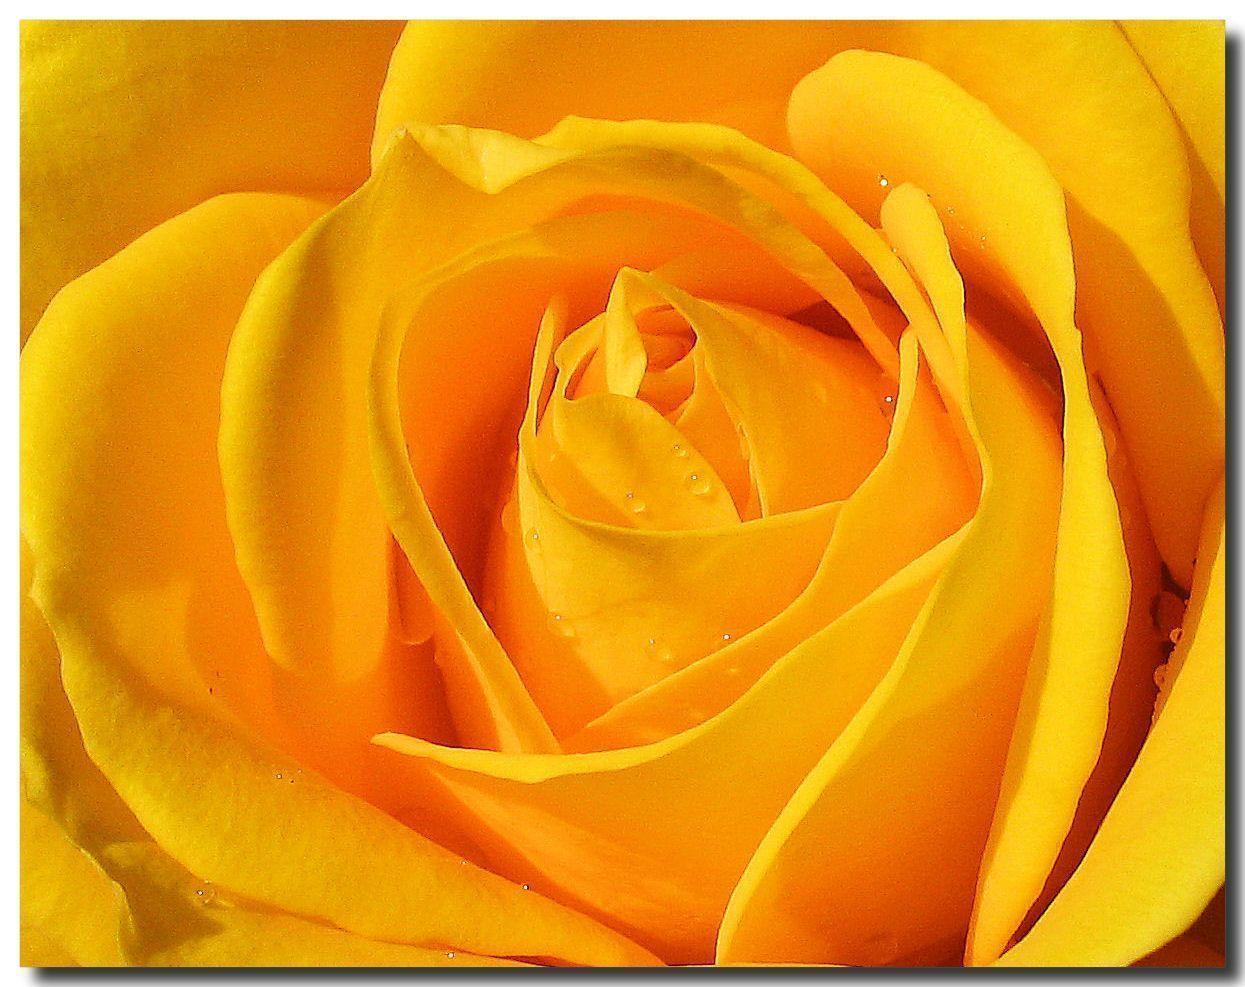 Yellow Roses Backgrounds - Wallpaper Cave